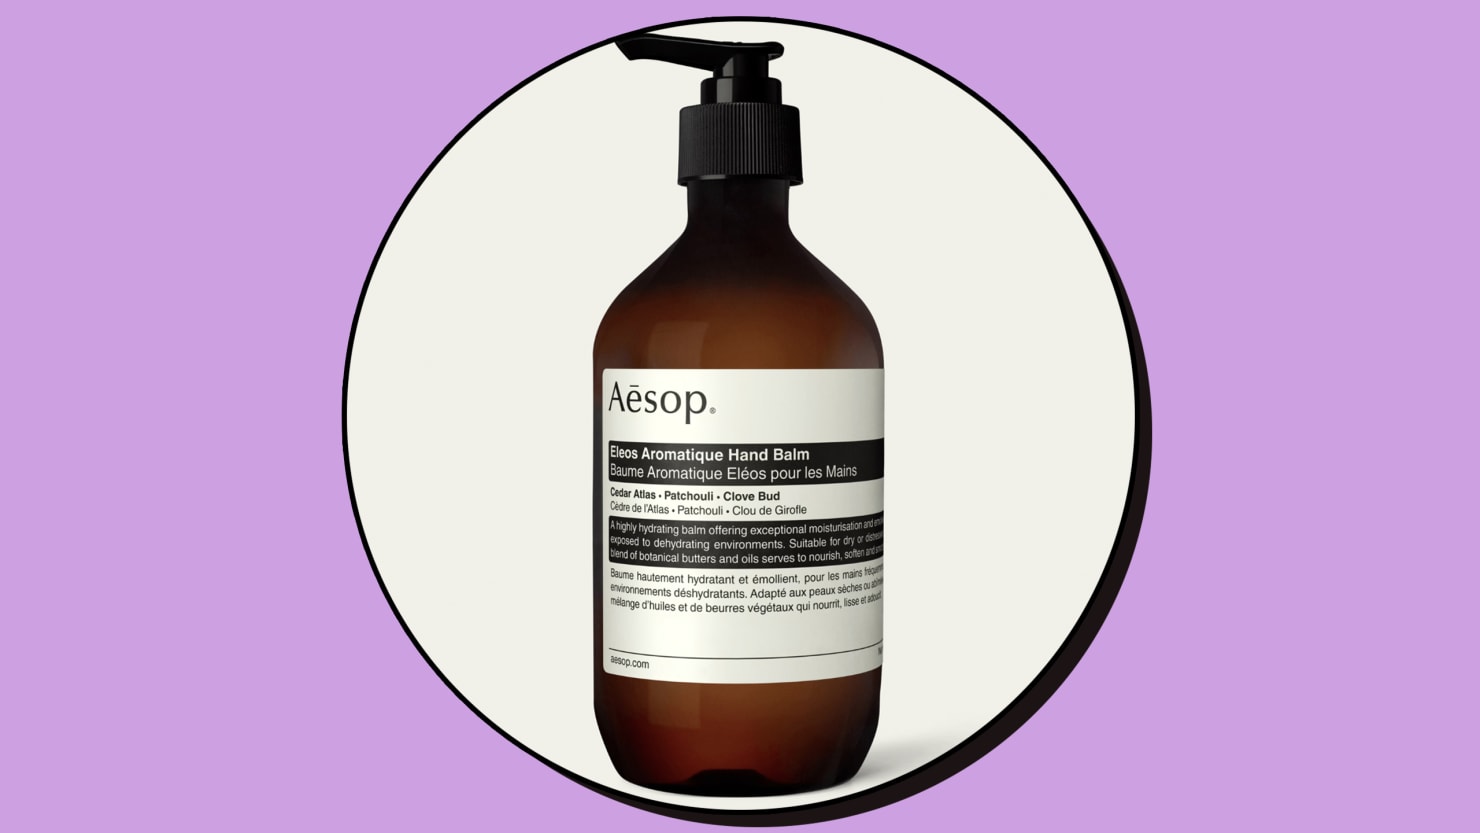 Aesop’s New Balm Brings a ‘Touch of Poetry’ to Hand Care